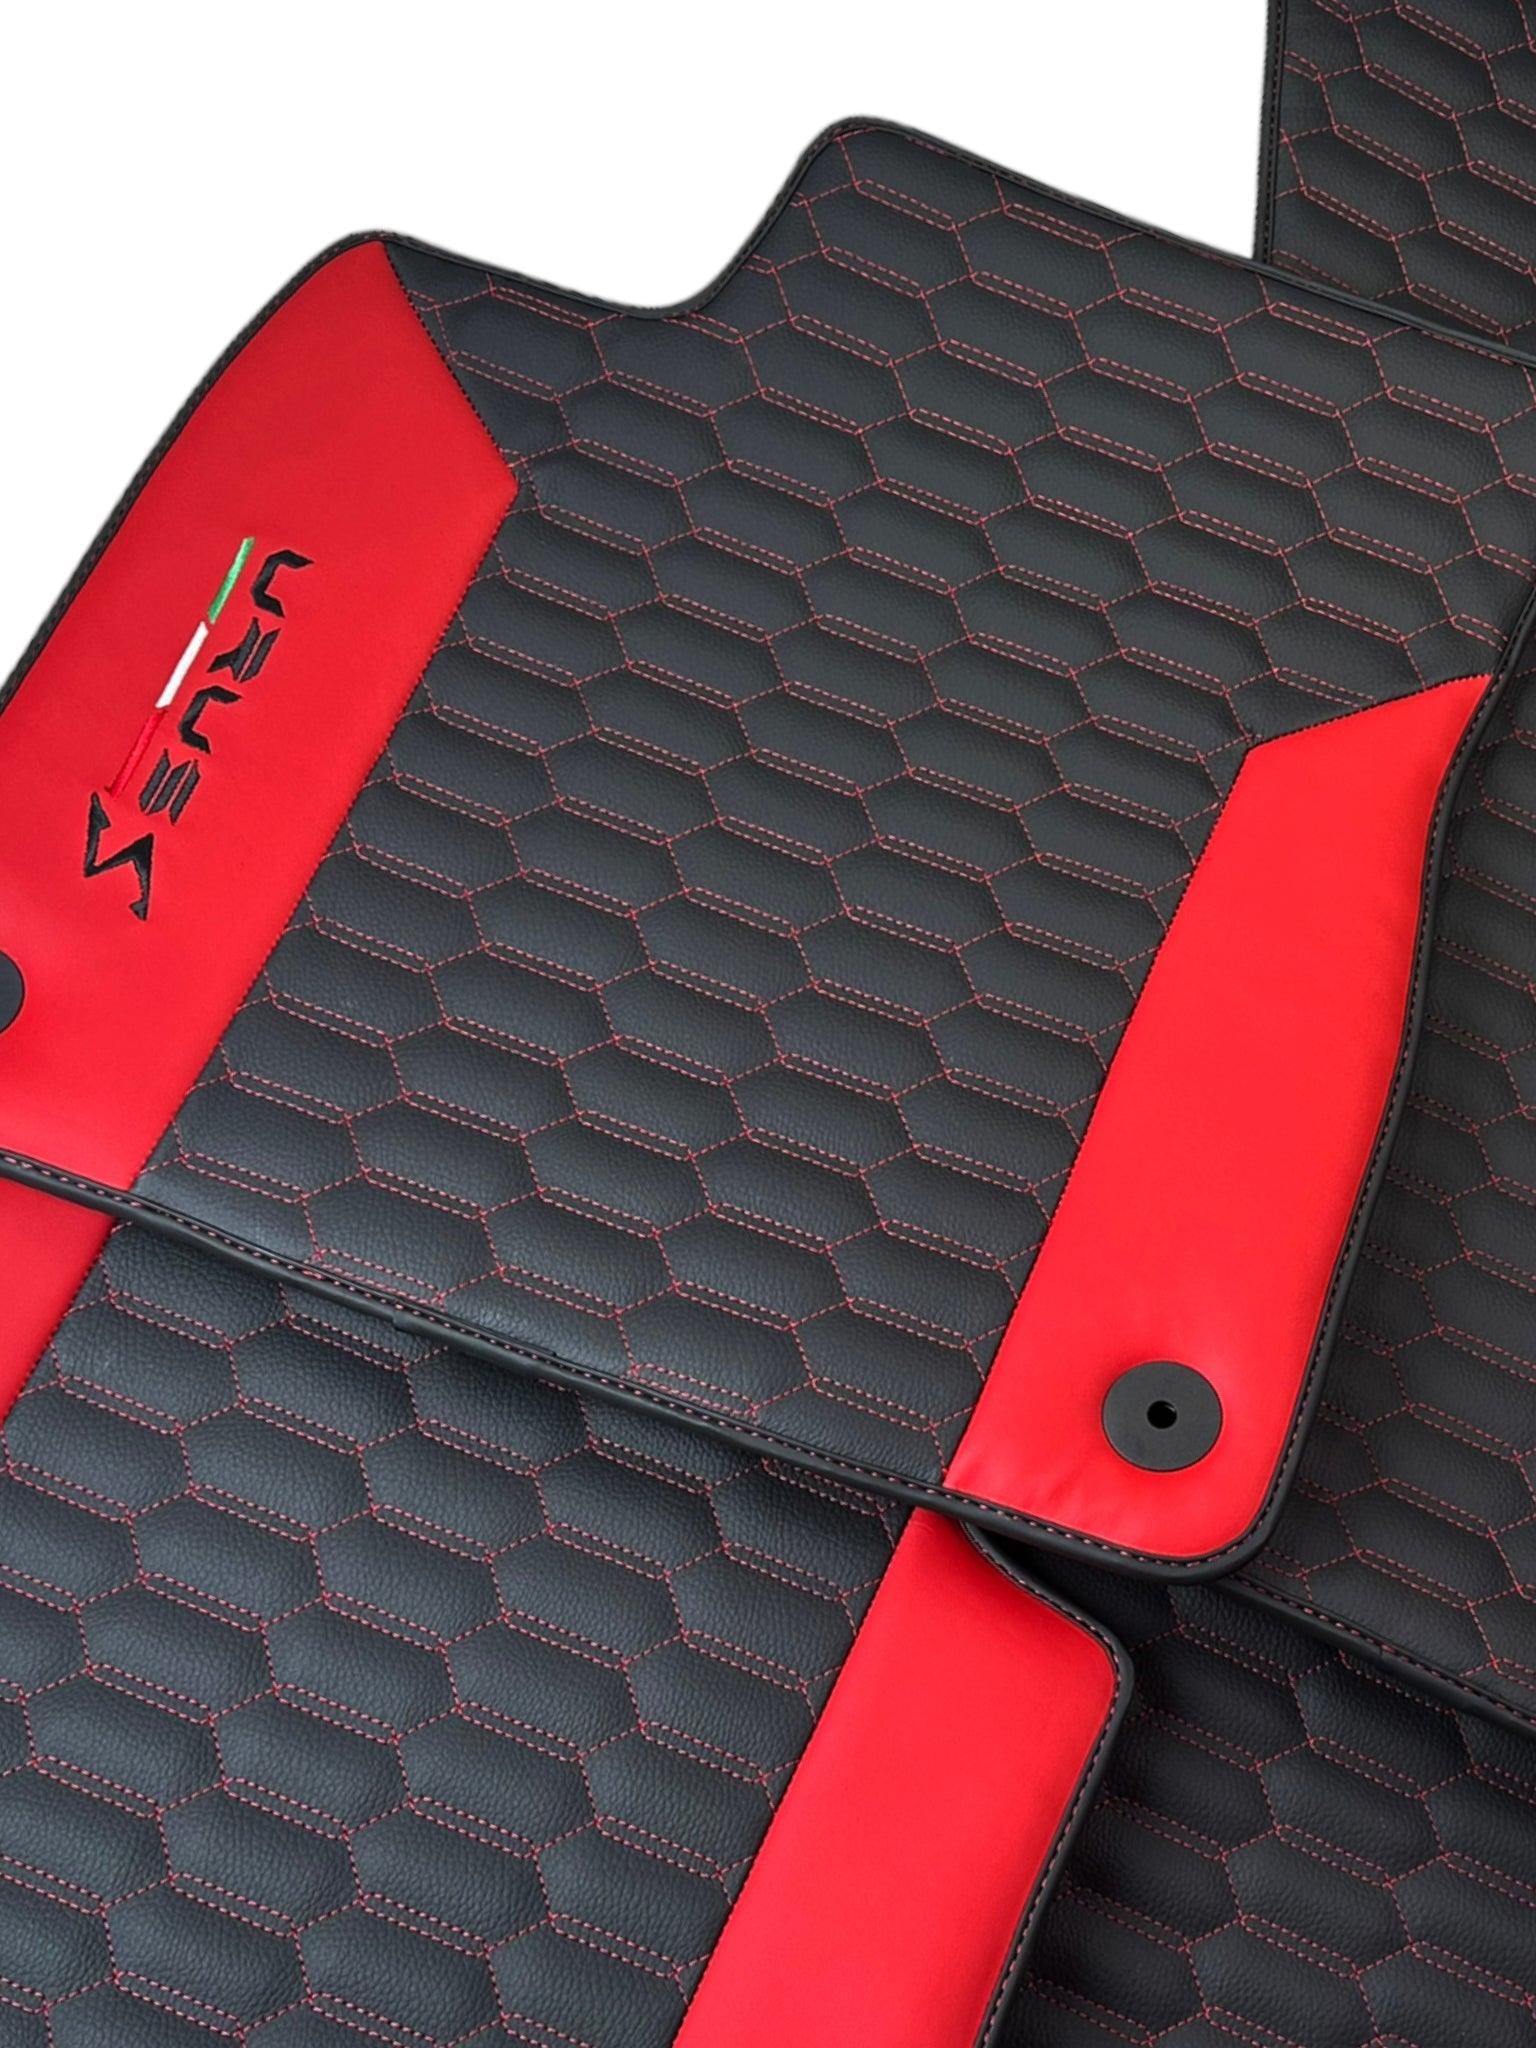 Black Leather Floor Mats For Lamborghini Urus S With Red Nappa Leather